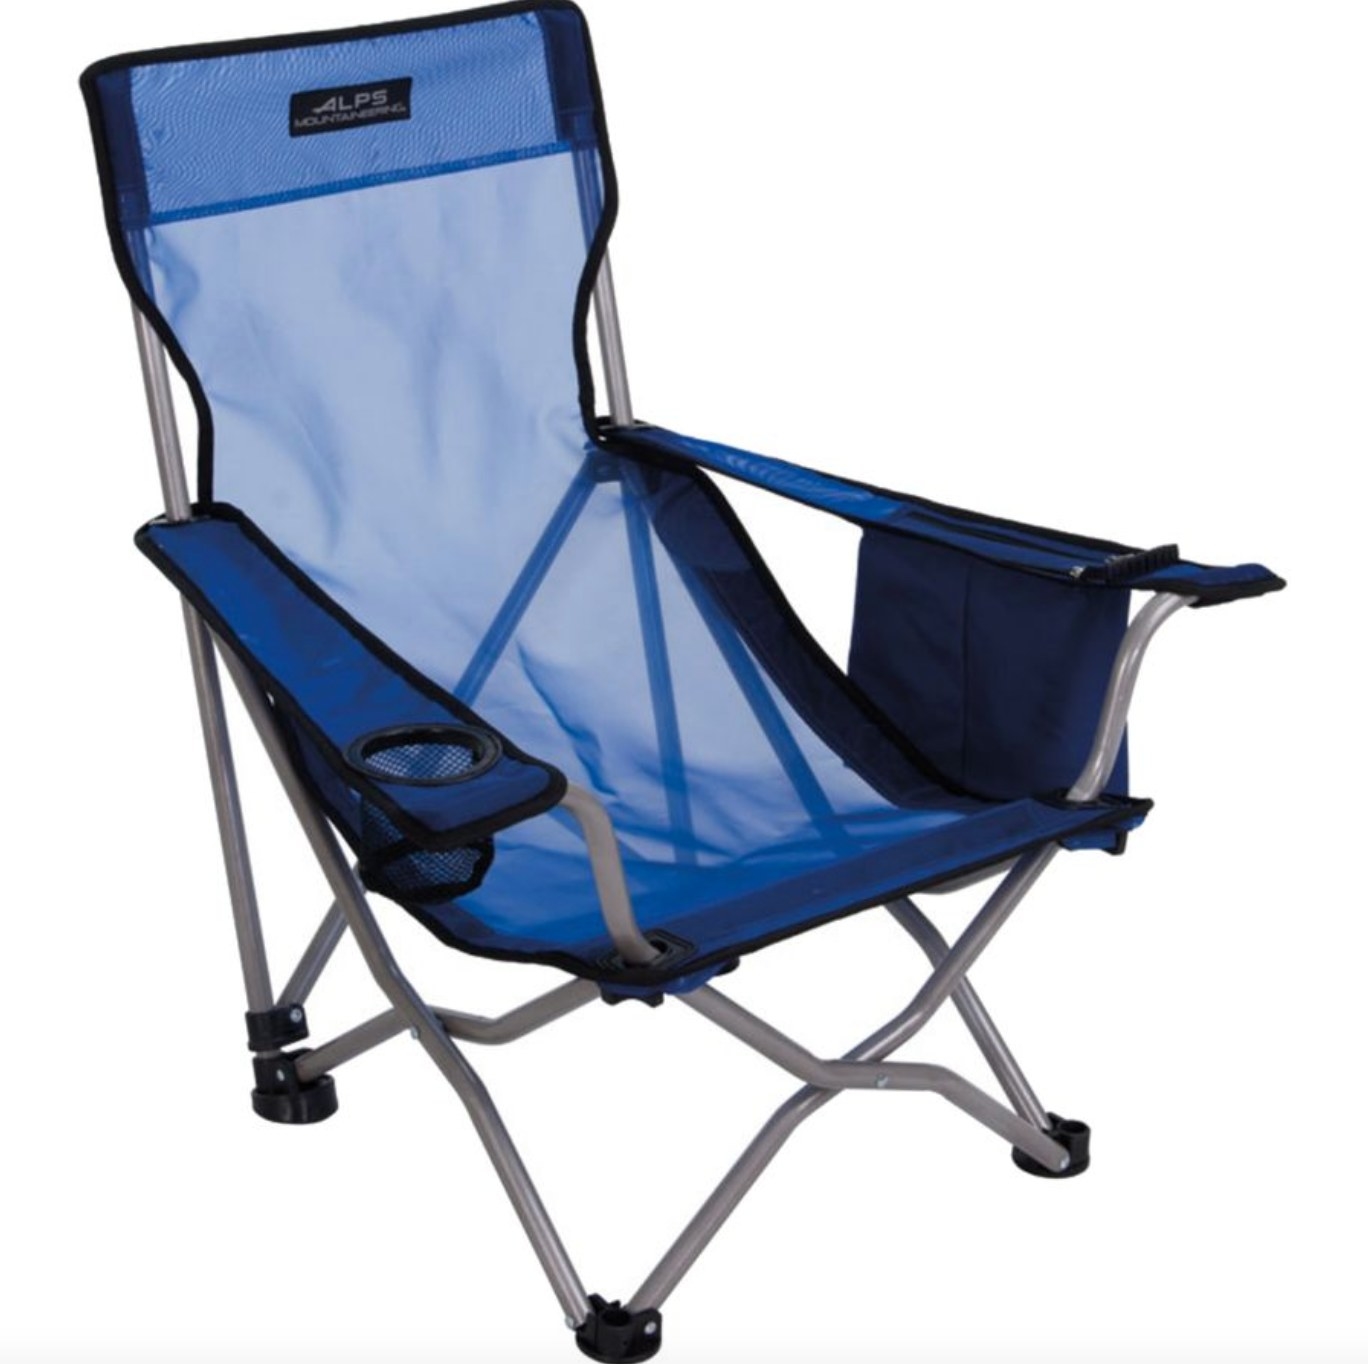 The ALPS Mountaineering Getaway chair in navy blue